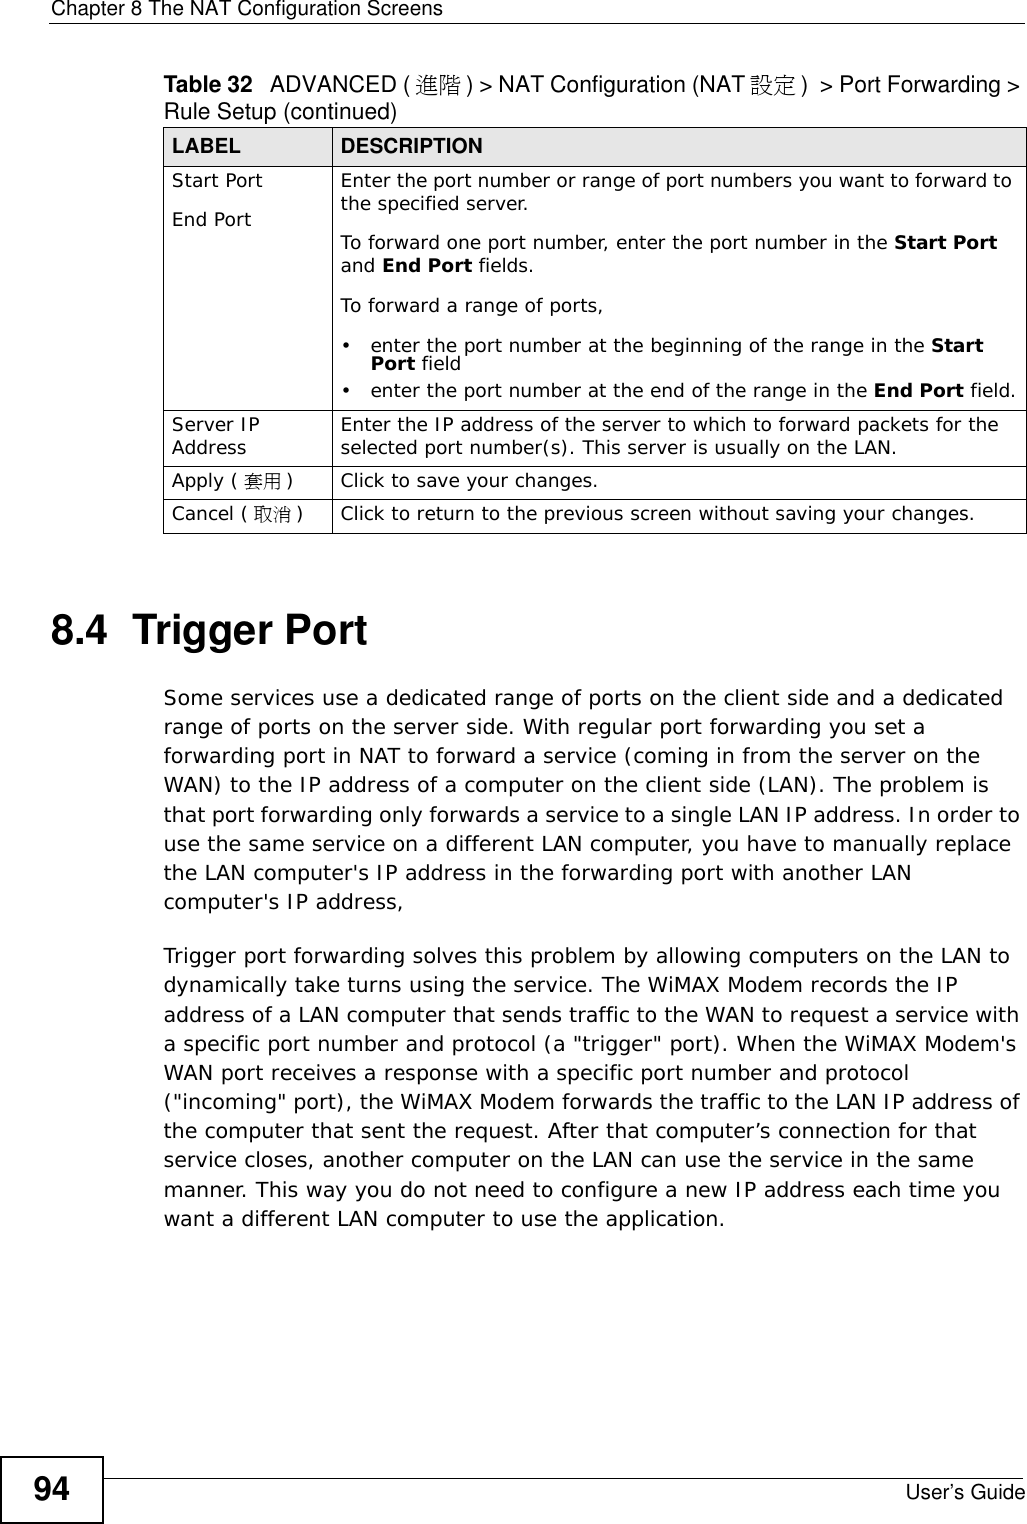 Chapter 8 The NAT Configuration ScreensUser’s Guide948.4  Trigger PortSome services use a dedicated range of ports on the client side and a dedicated range of ports on the server side. With regular port forwarding you set a forwarding port in NAT to forward a service (coming in from the server on the WAN) to the IP address of a computer on the client side (LAN). The problem is that port forwarding only forwards a service to a single LAN IP address. In order to use the same service on a different LAN computer, you have to manually replace the LAN computer&apos;s IP address in the forwarding port with another LAN computer&apos;s IP address, Trigger port forwarding solves this problem by allowing computers on the LAN to dynamically take turns using the service. The WiMAX Modem records the IP address of a LAN computer that sends traffic to the WAN to request a service with a specific port number and protocol (a &quot;trigger&quot; port). When the WiMAX Modem&apos;s WAN port receives a response with a specific port number and protocol (&quot;incoming&quot; port), the WiMAX Modem forwards the traffic to the LAN IP address of the computer that sent the request. After that computer’s connection for that service closes, another computer on the LAN can use the service in the same manner. This way you do not need to configure a new IP address each time you want a different LAN computer to use the application.Start PortEnd PortEnter the port number or range of port numbers you want to forward to the specified server.To forward one port number, enter the port number in the Start Port and End Port fields.To forward a range of ports,• enter the port number at the beginning of the range in the Start Port field• enter the port number at the end of the range in the End Port field.Server IP Address Enter the IP address of the server to which to forward packets for the selected port number(s). This server is usually on the LAN.Apply ( 套用 )Click to save your changes.Cancel ( 取消 ) Click to return to the previous screen without saving your changes.Table 32   ADVANCED ( 進階 ) &gt; NAT Configuration (NAT 設定 )  &gt; Port Forwarding &gt; Rule Setup (continued)LABEL DESCRIPTION